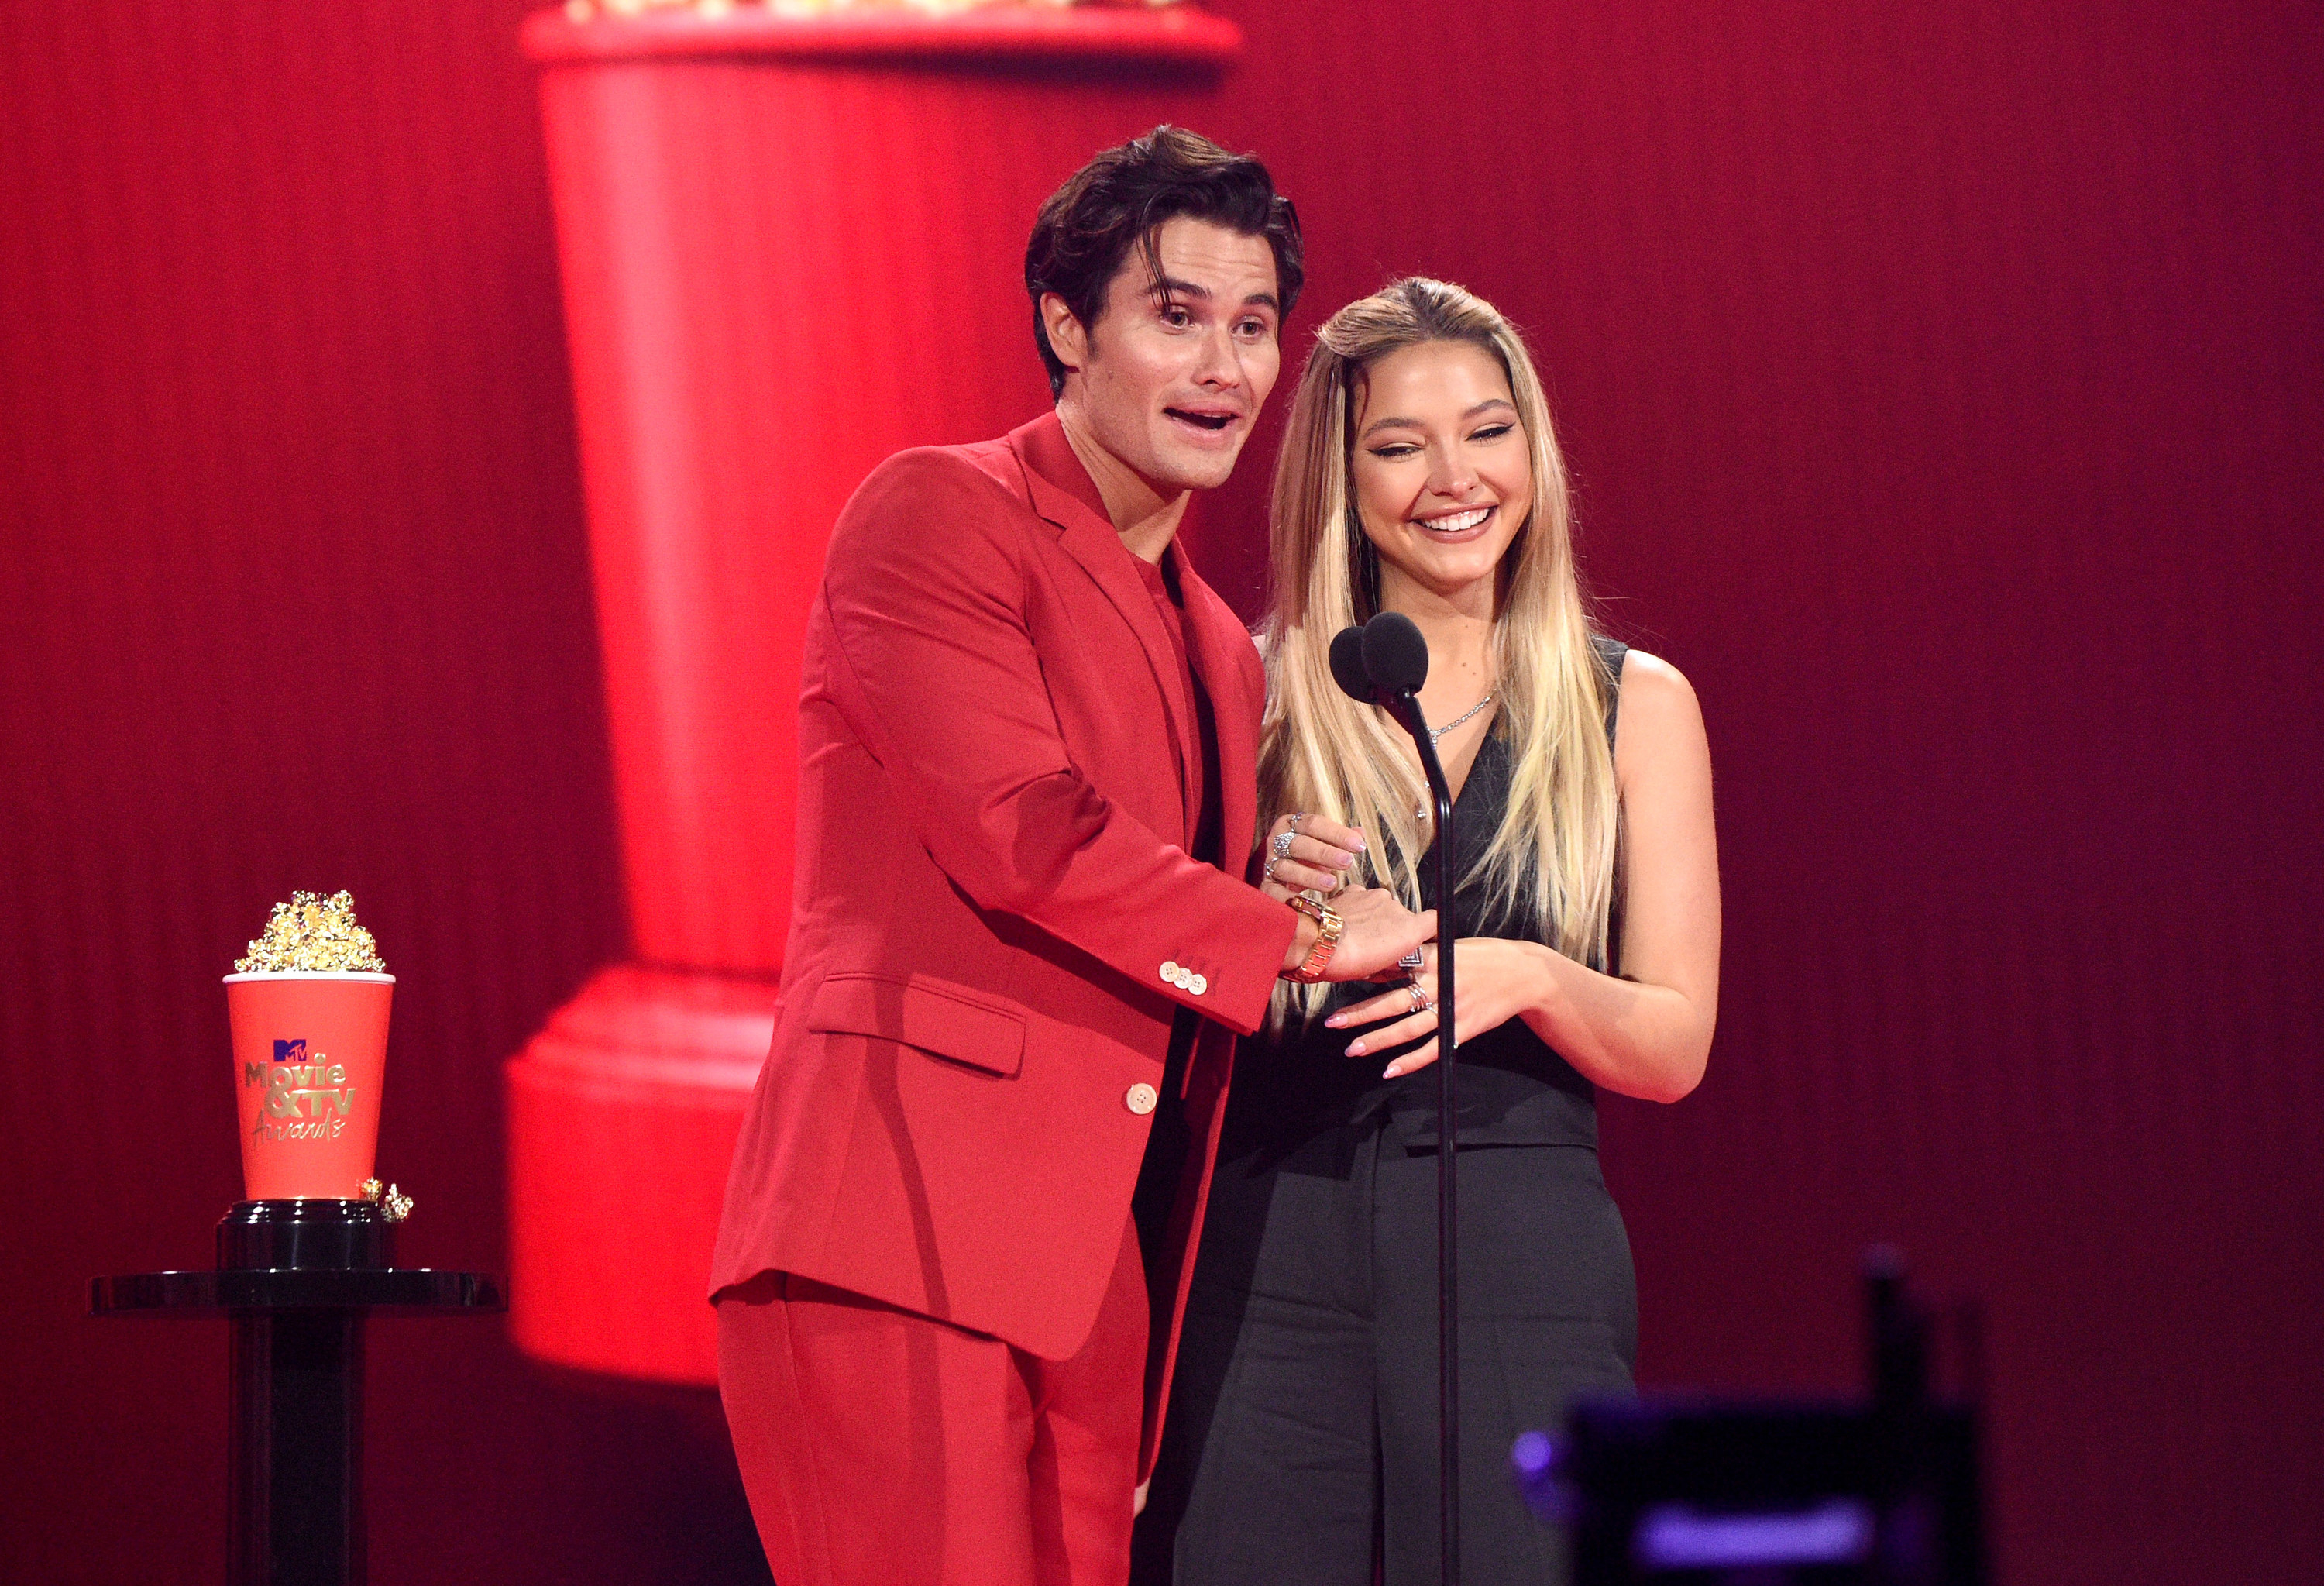 Madelyn Cline and Chase Stokes at the 2021 MTV Awards